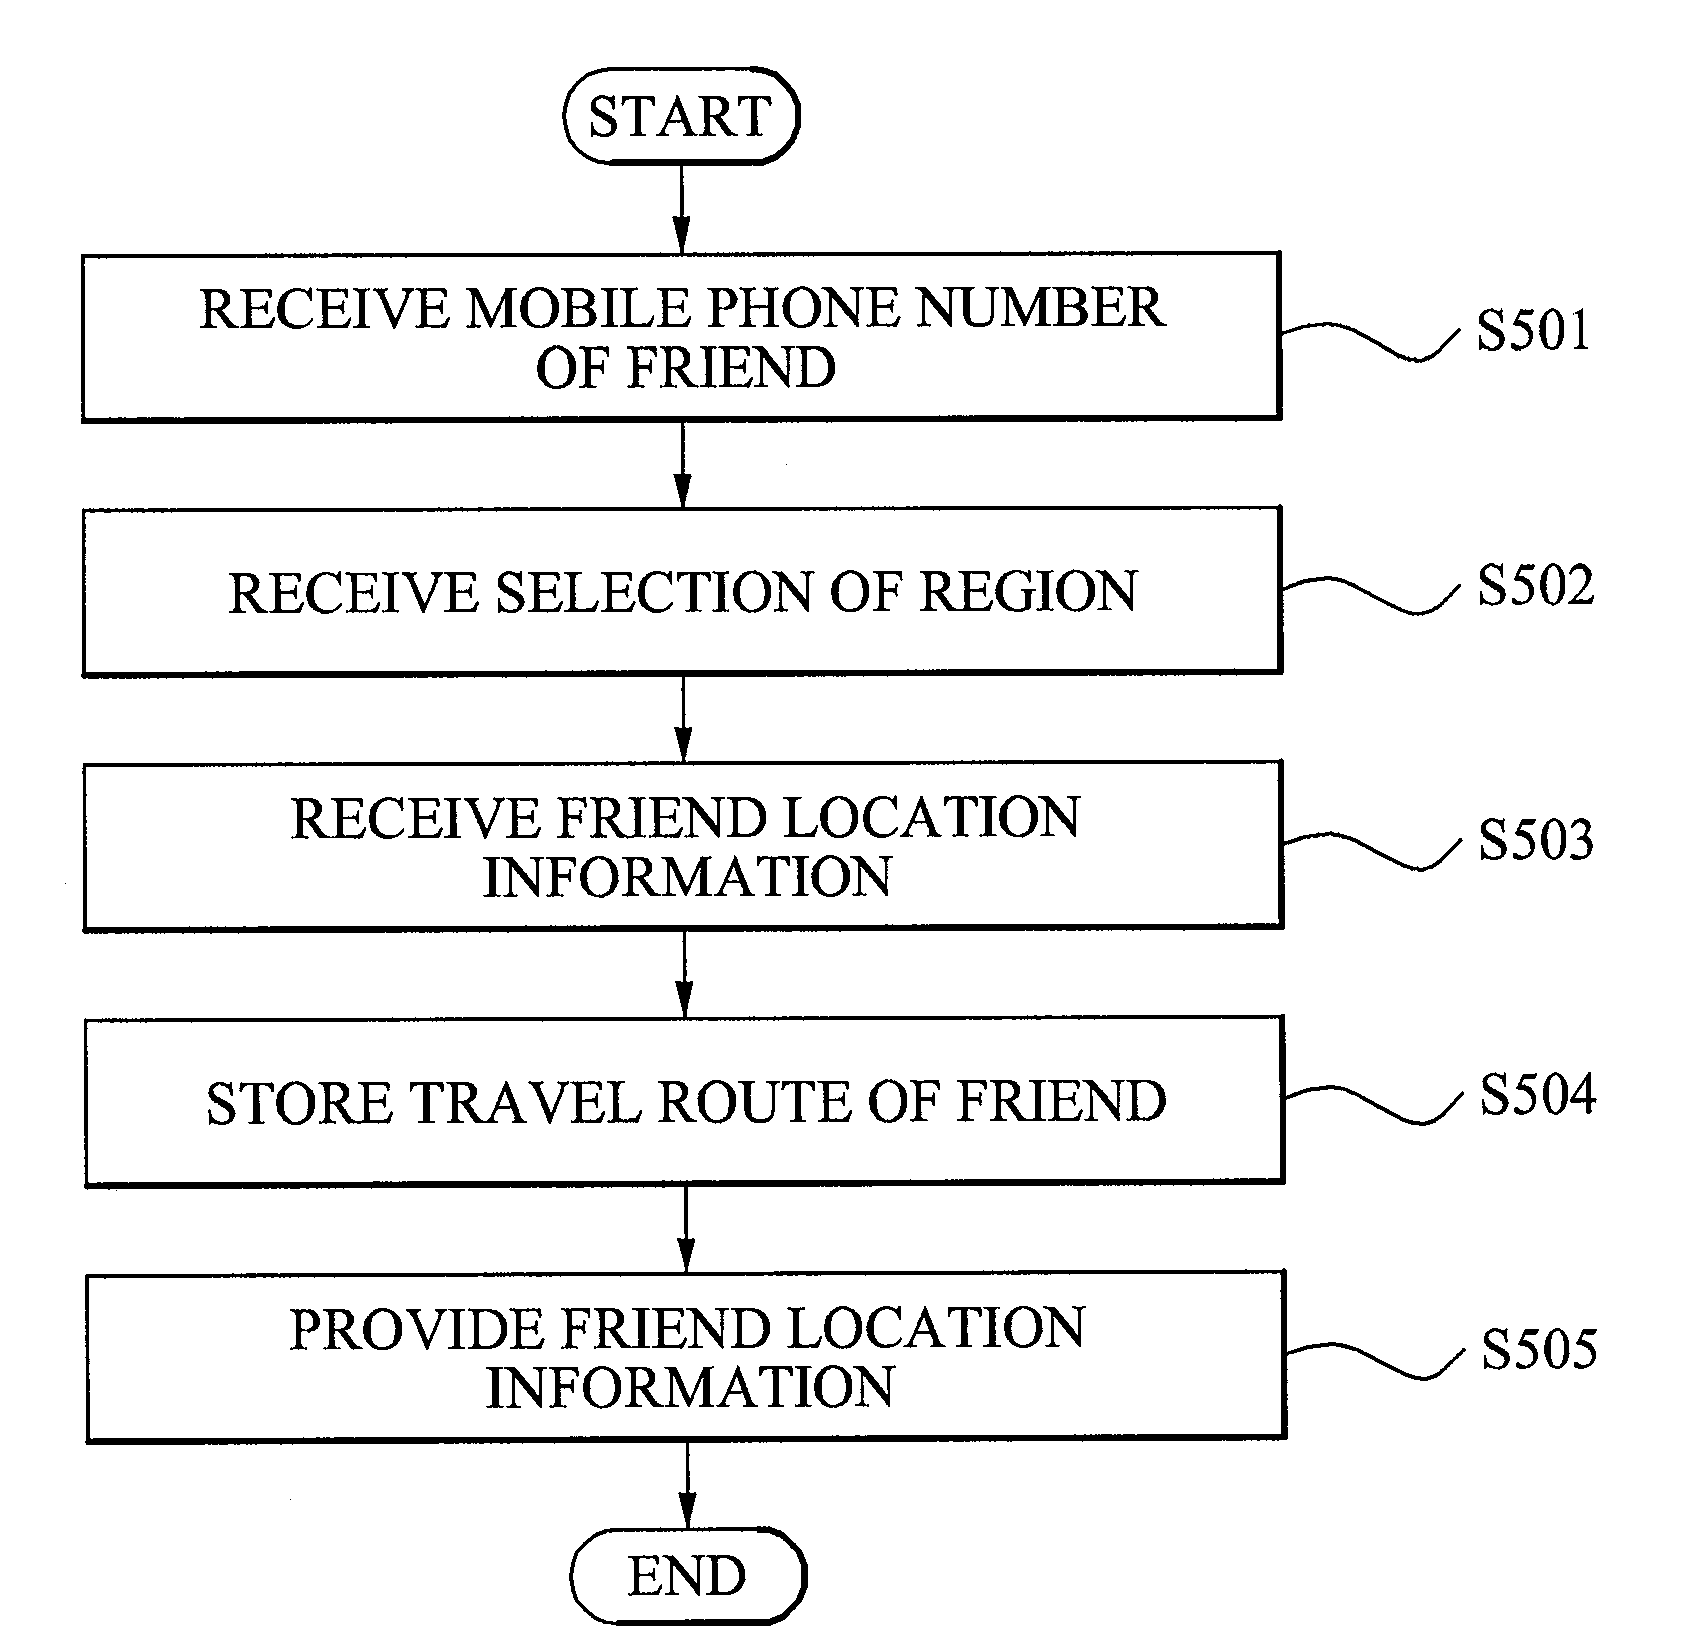 System and method for providing friend's location information